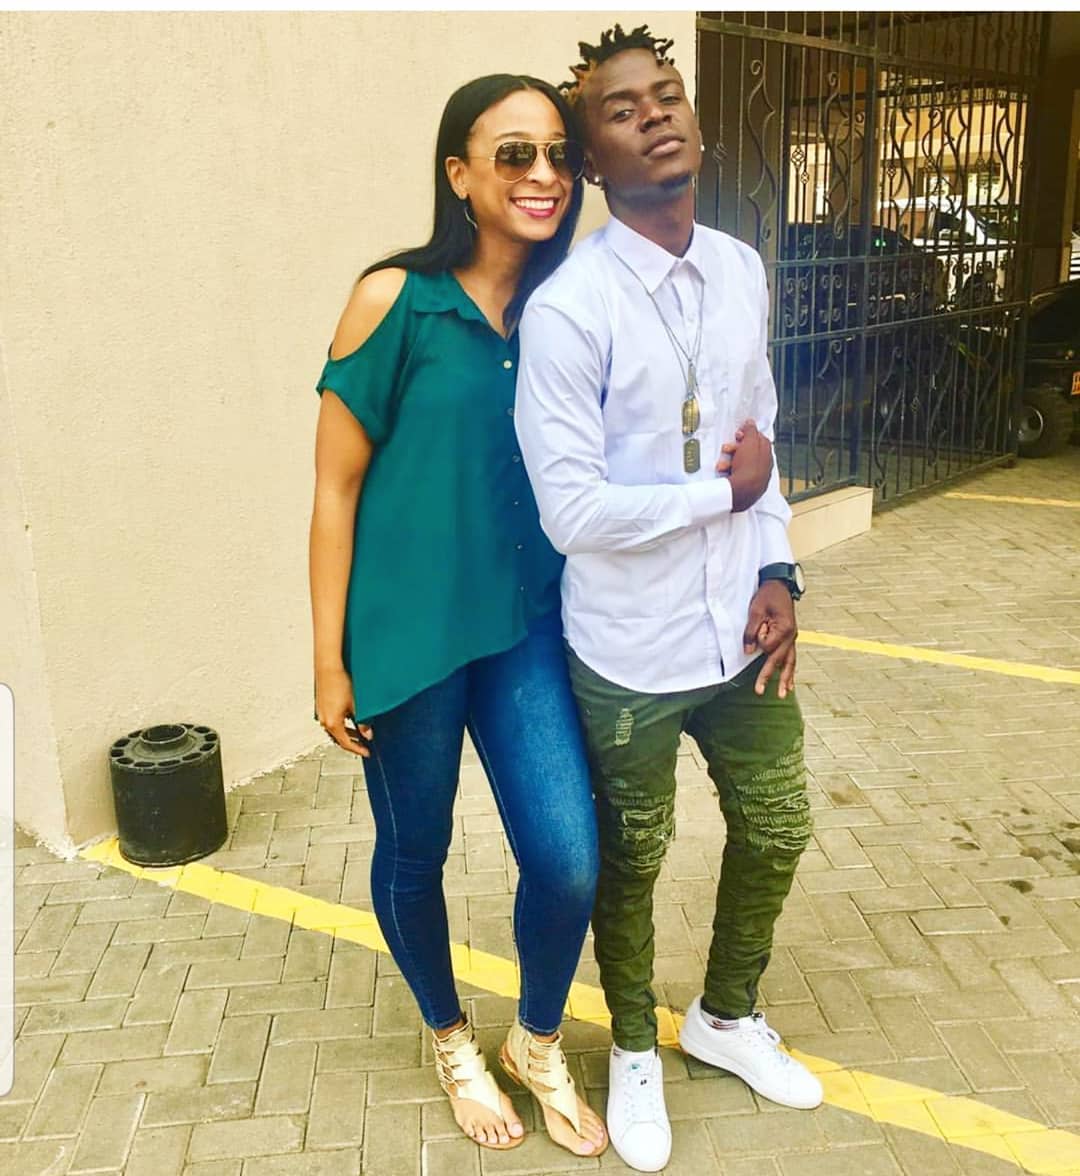 Willy Paul and Alaine in their new jam Shado Mado